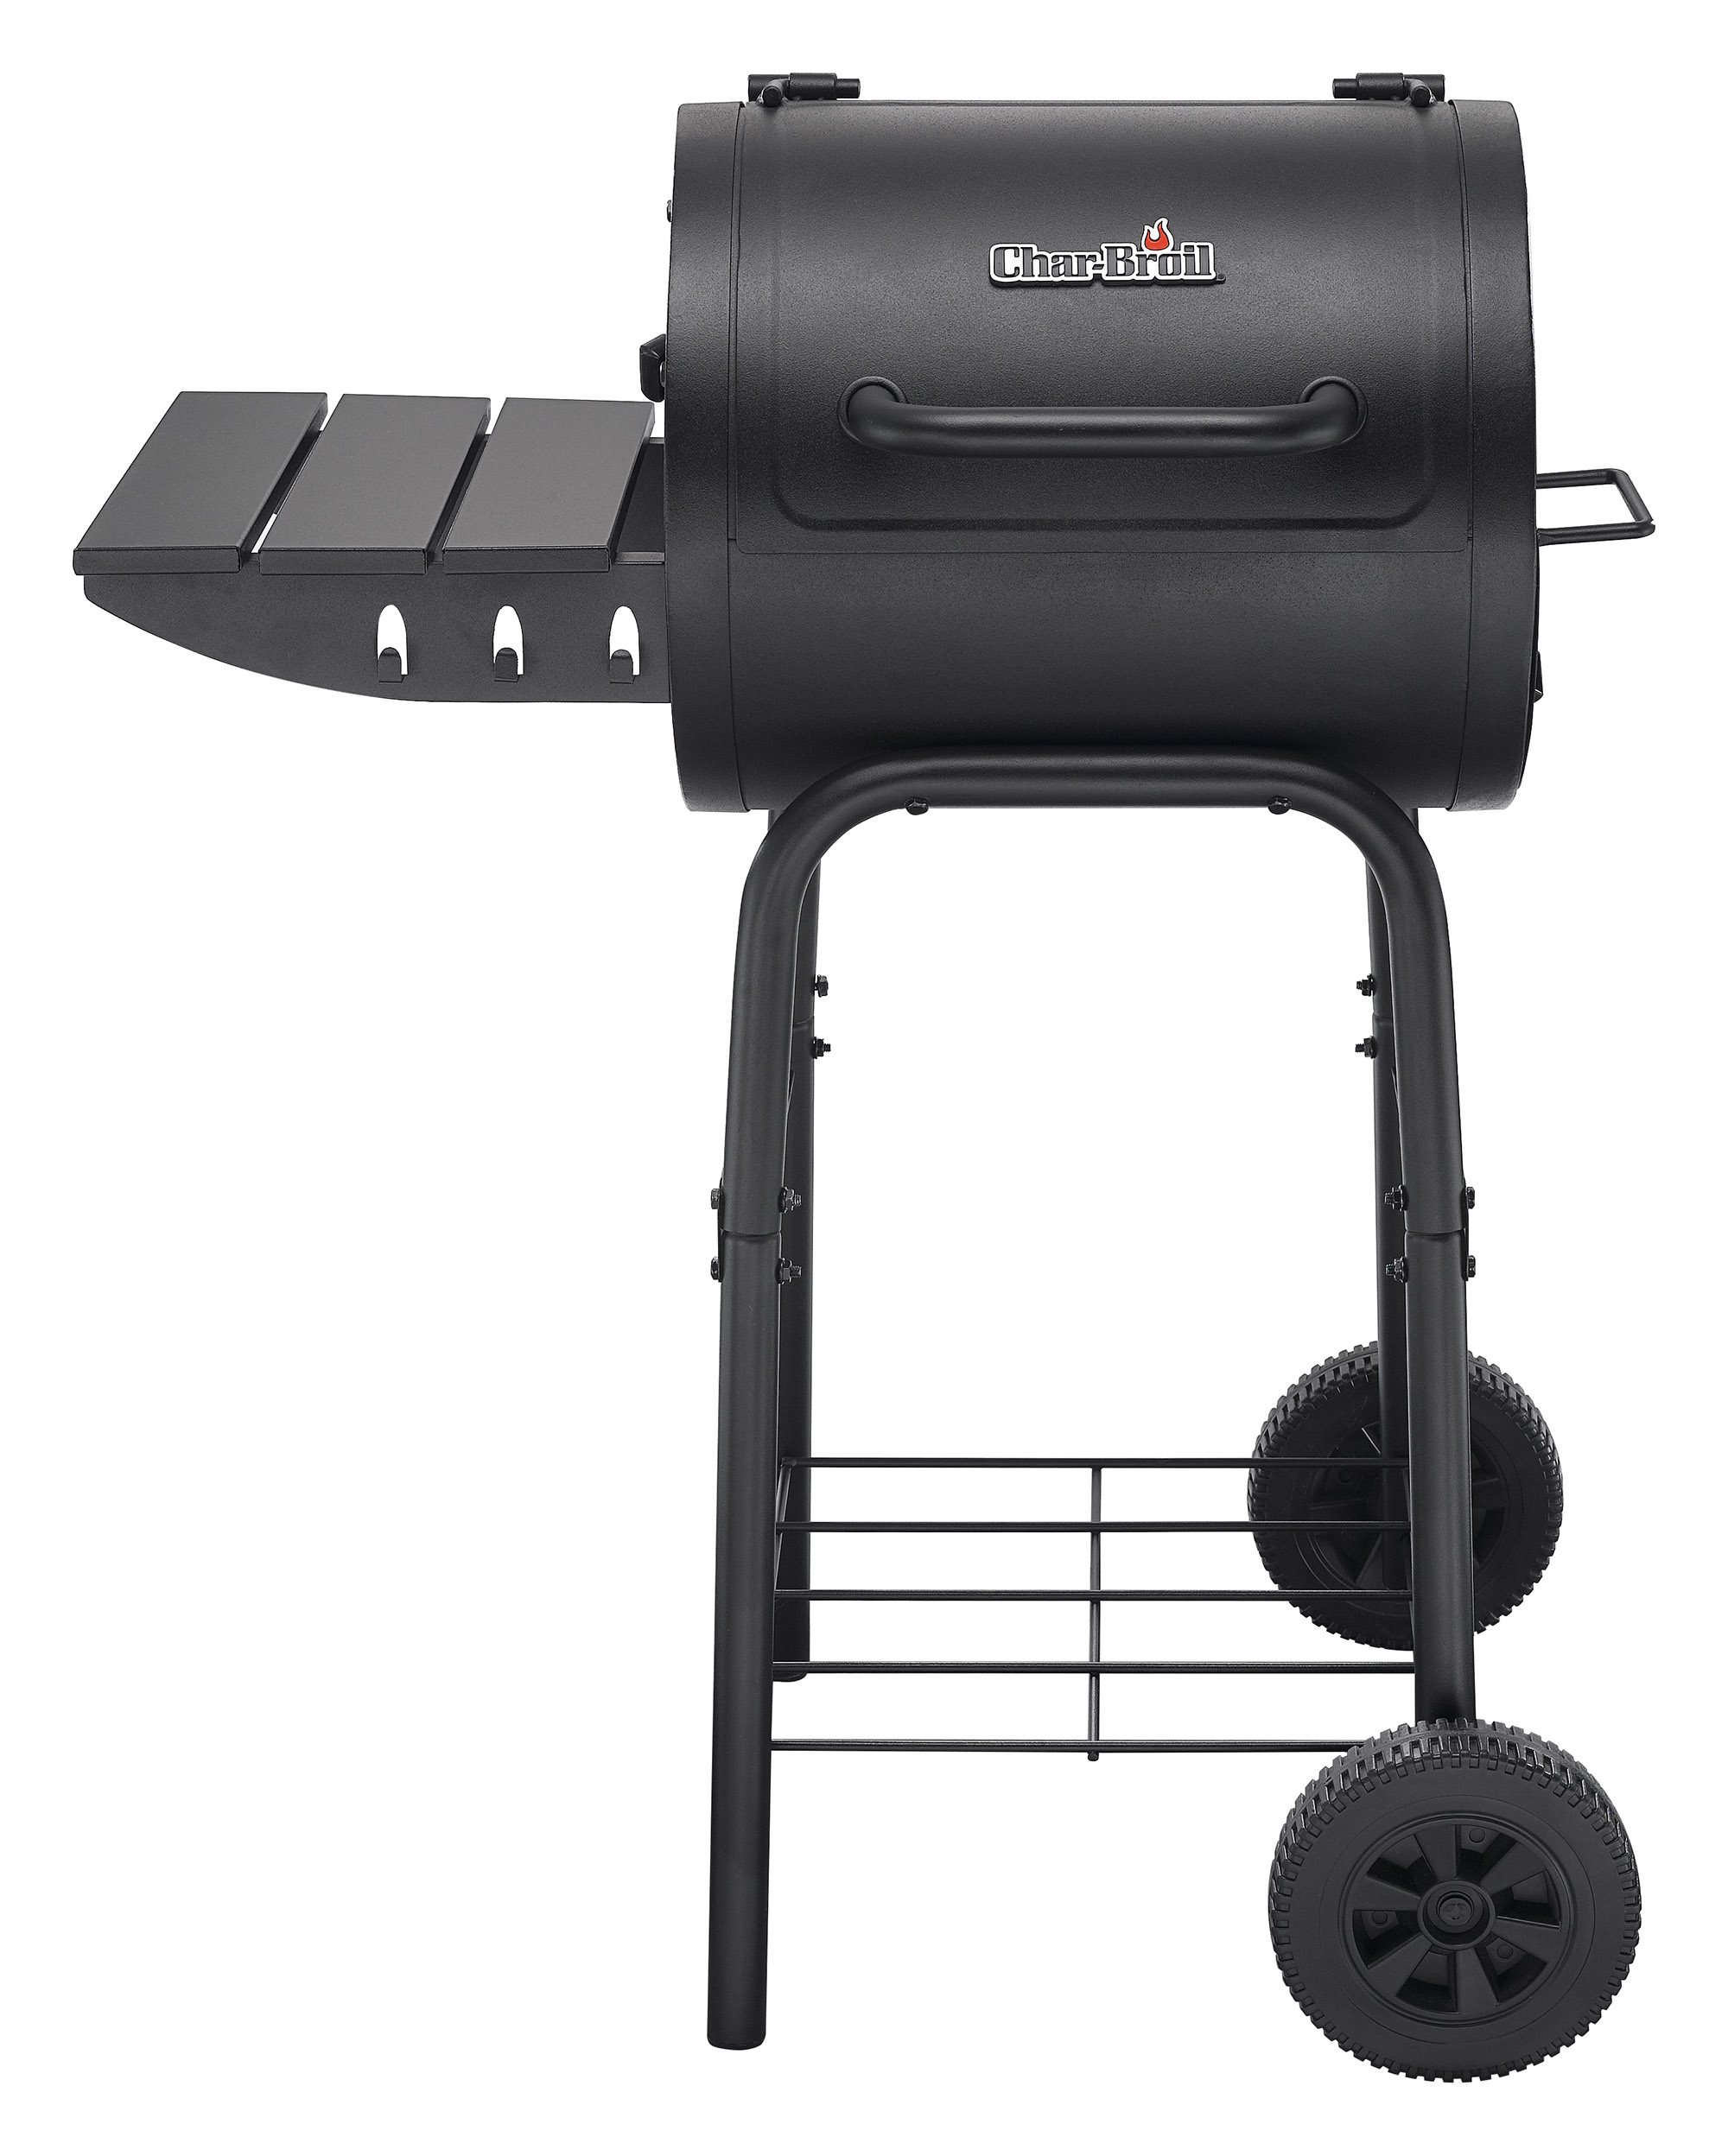 Char-Broil American Gourmet 18-inch Charcoal Barrel Grill - image 1 of 6